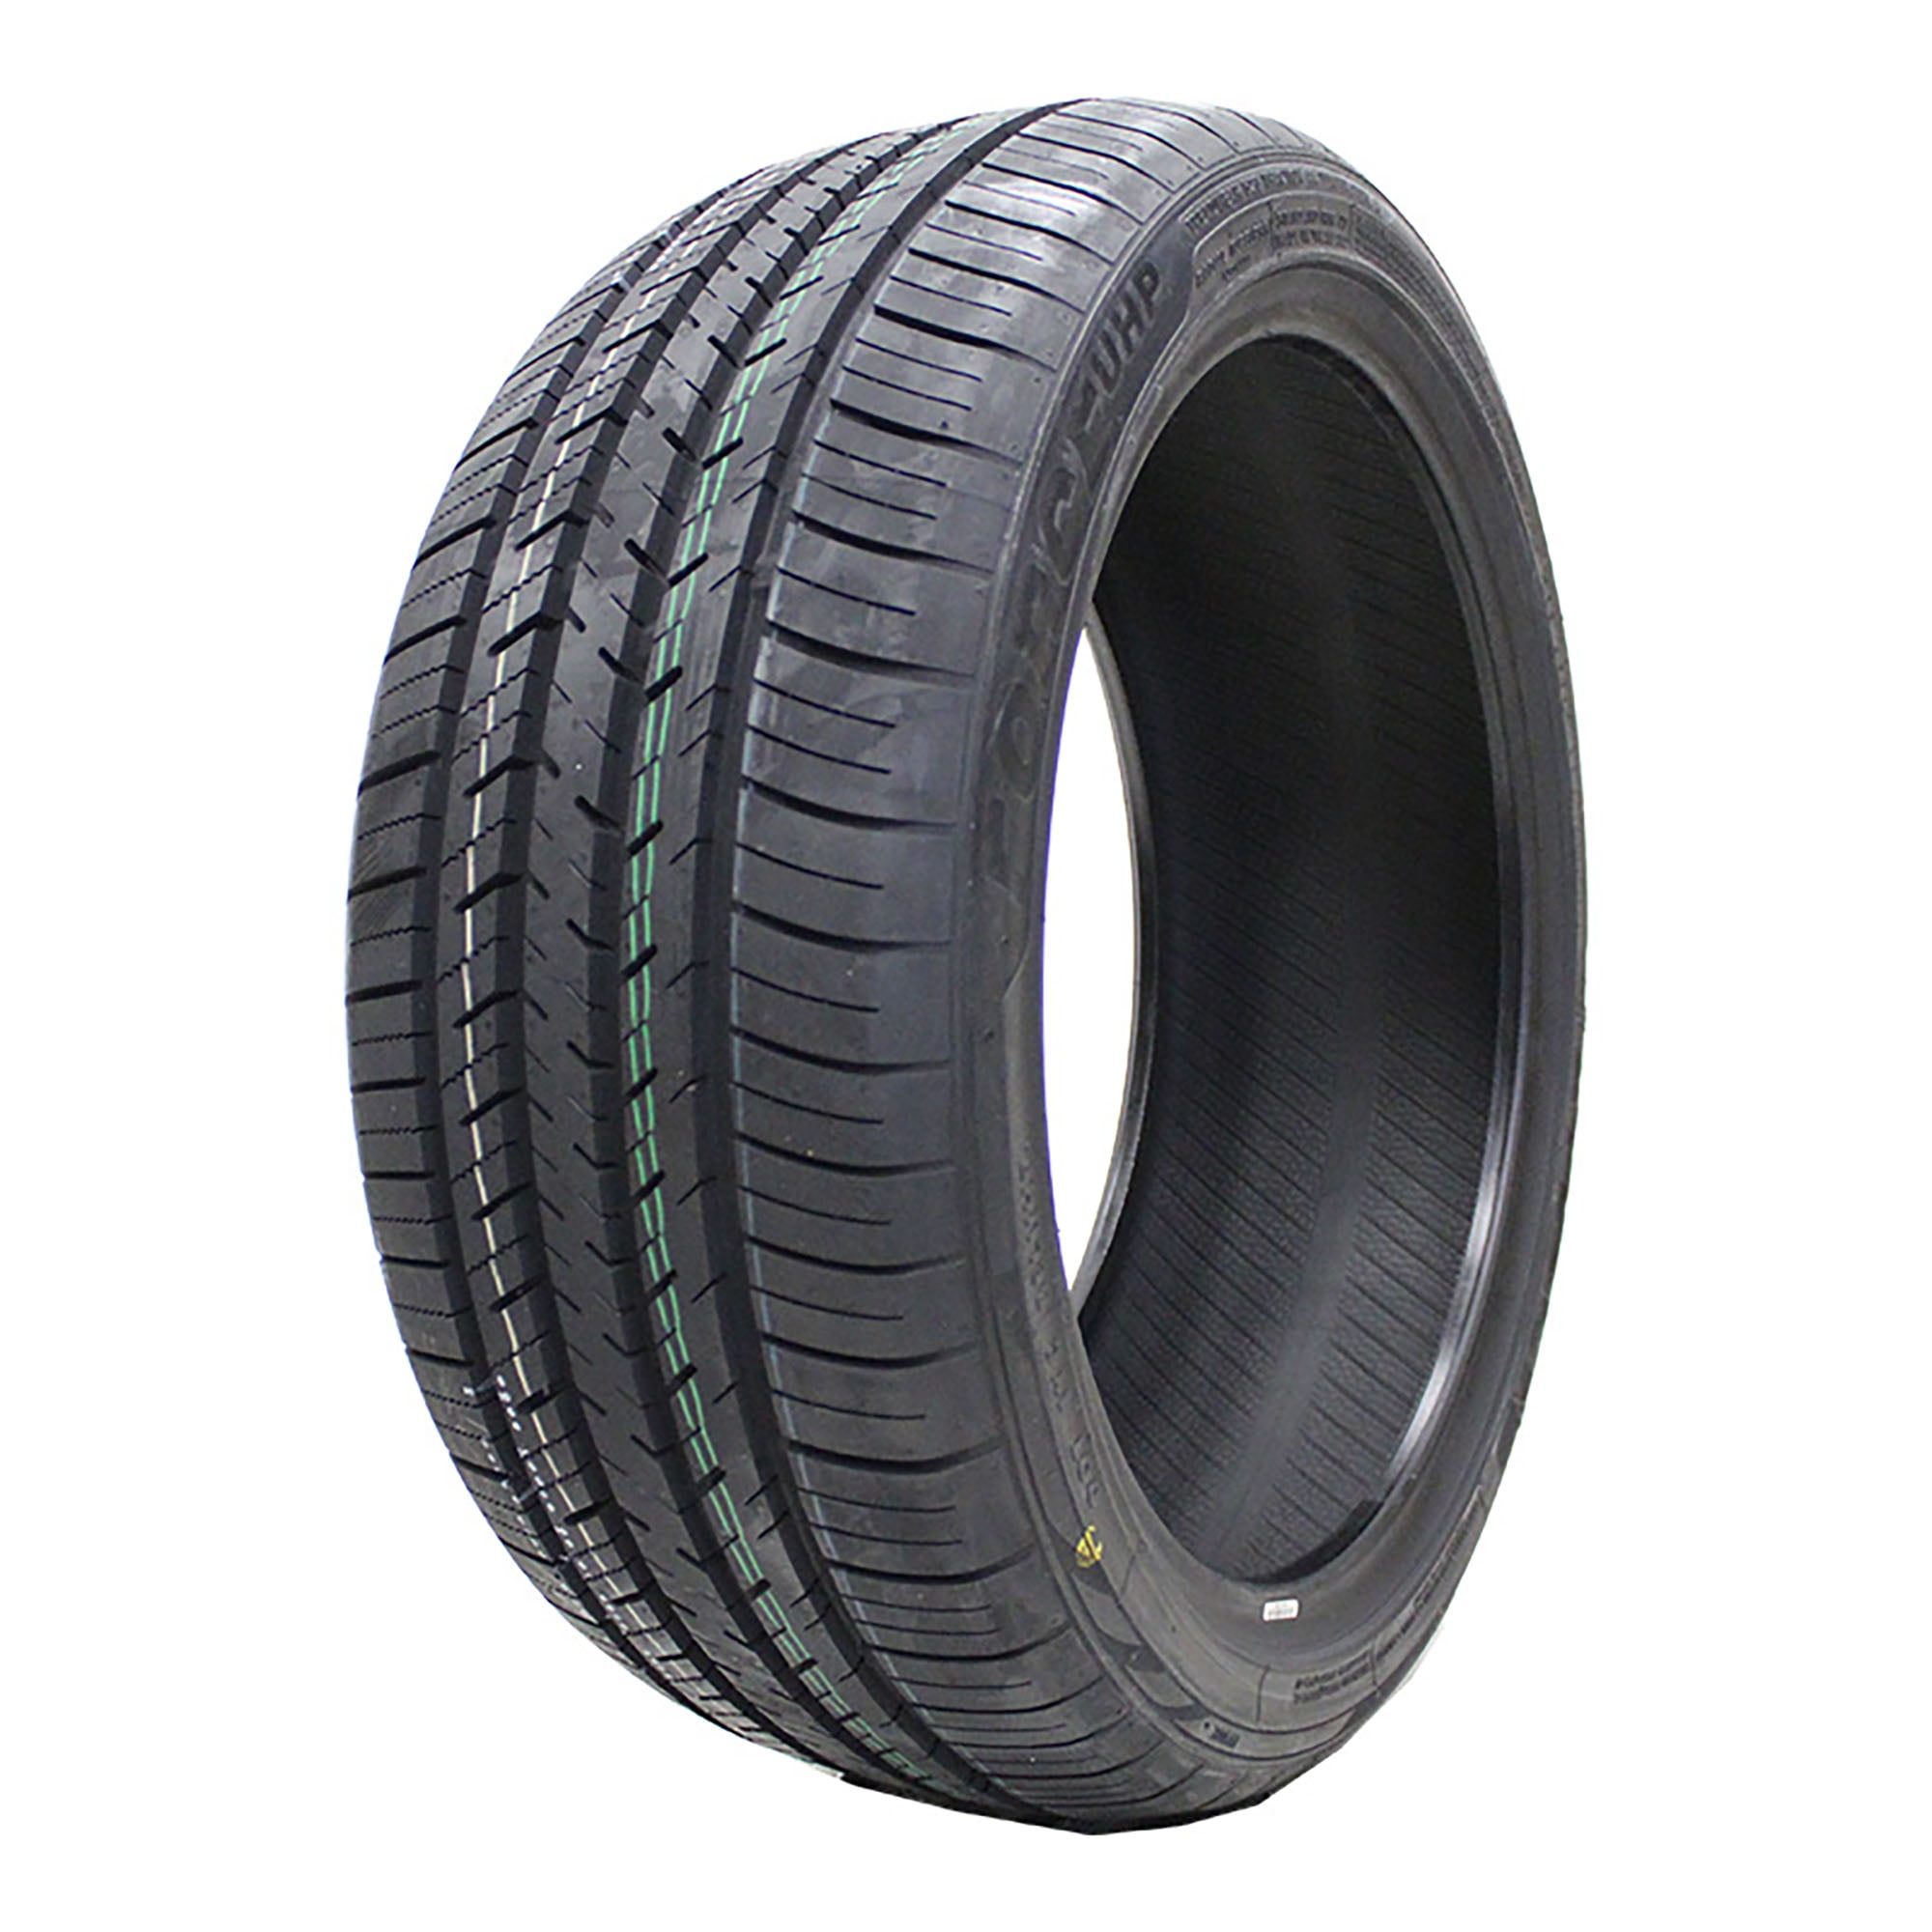 Ultra 275/35ZR19XL High (100Y) BSW Performance Tire Continental 6 ContiSportContact